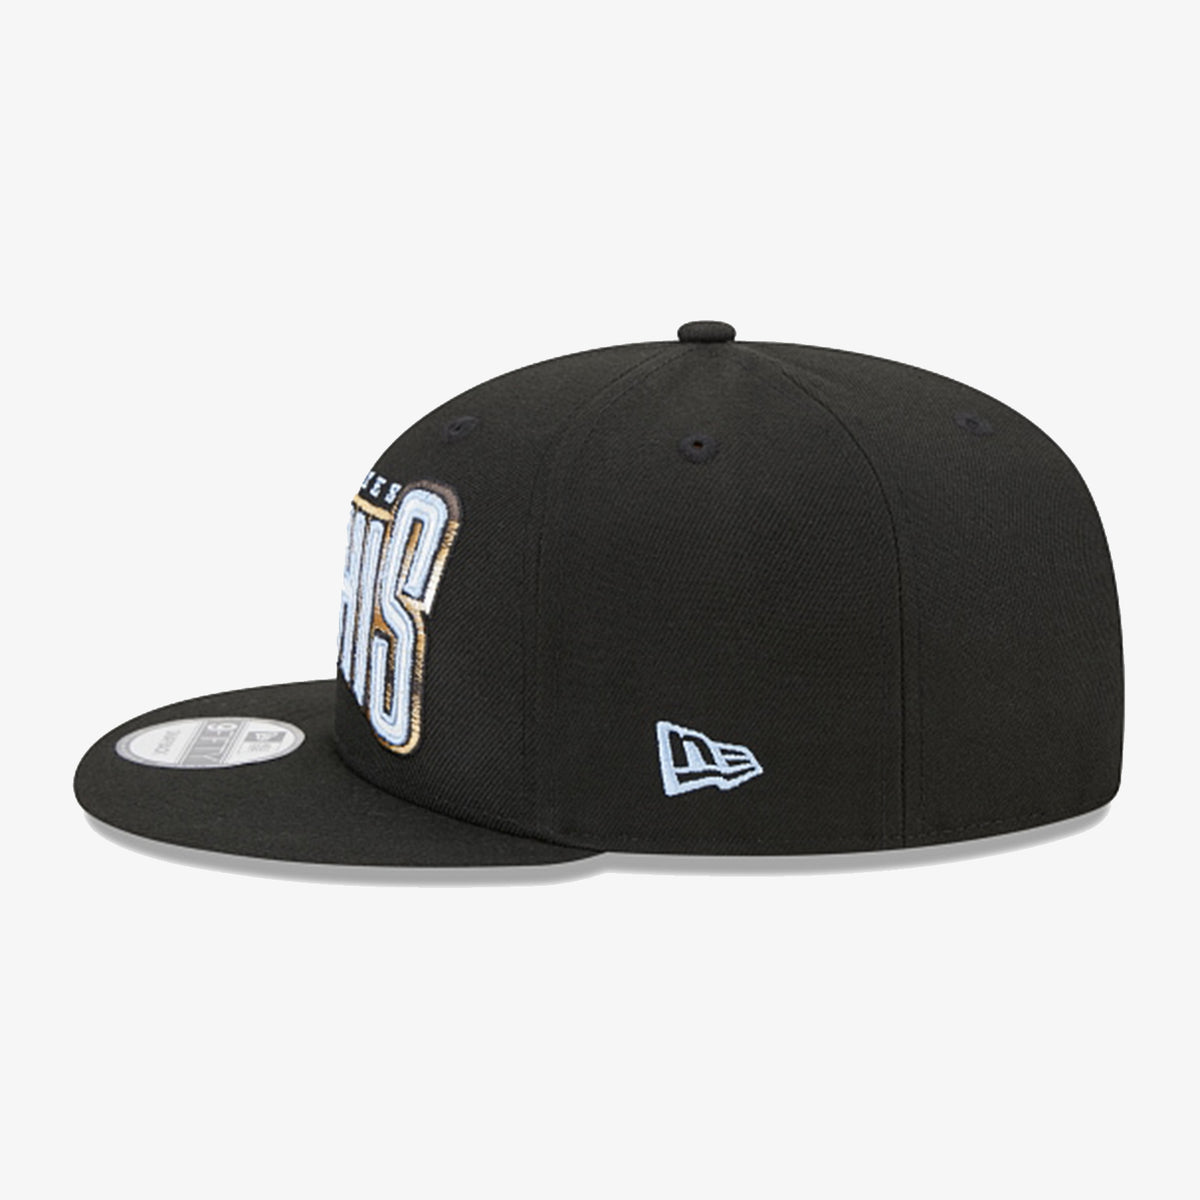 Memphis Grizzlies 9Fifty City Edition Snapback